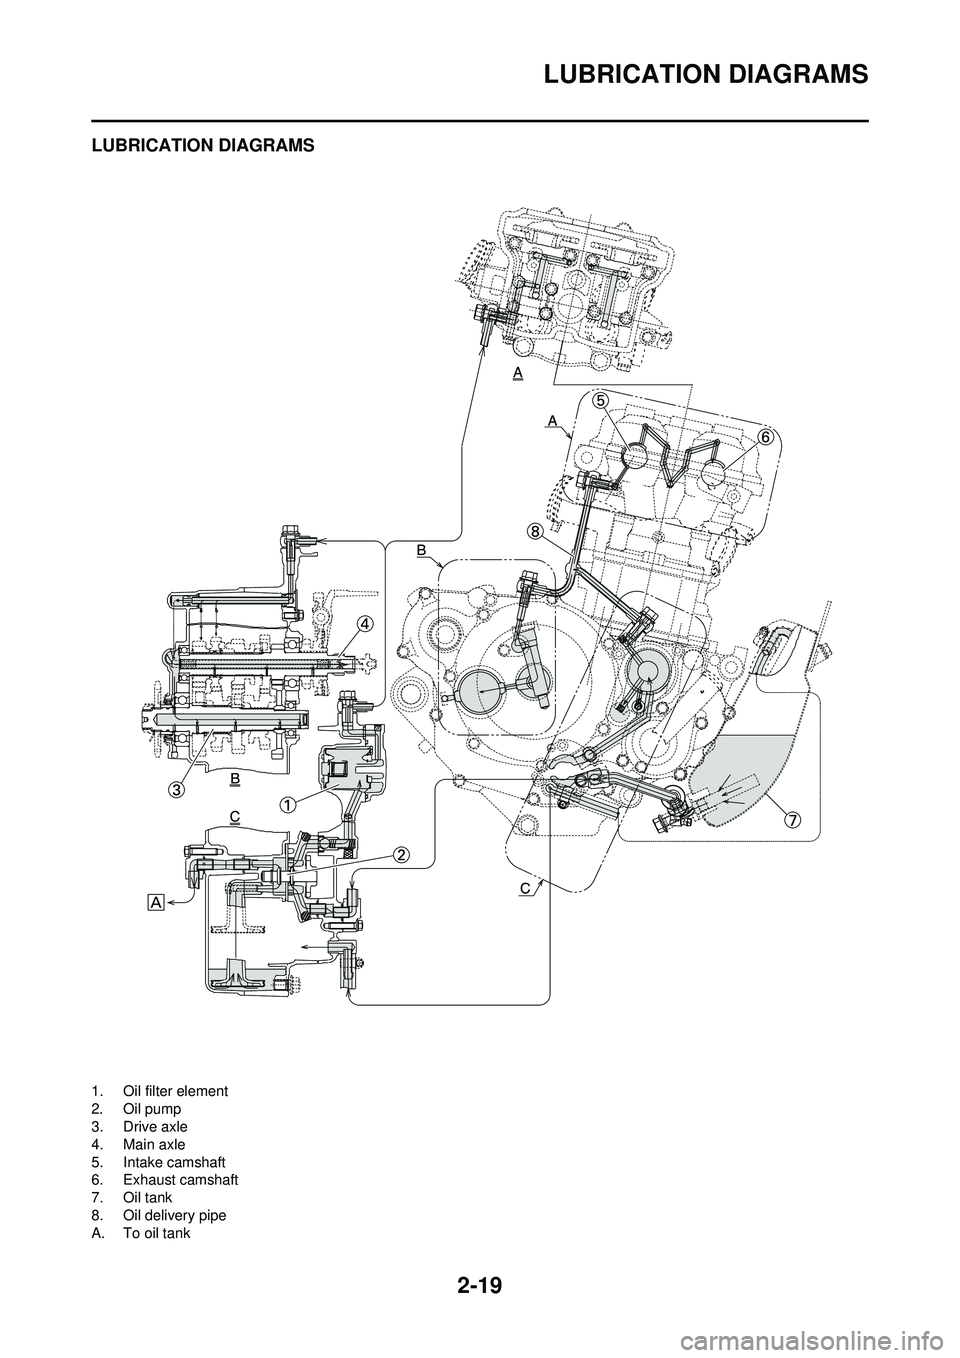 YAMAHA WR 250F 2010  Owners Manual 2-19
LUBRICATION DIAGRAMS
LUBRICATION DIAGRAMS
1. Oil filter element
2. Oil pump
3. Drive axle
4. Main axle
5. Intake camshaft
6. Exhaust camshaft
7. Oil tank
8. Oil delivery pipe
A. To oil tank 